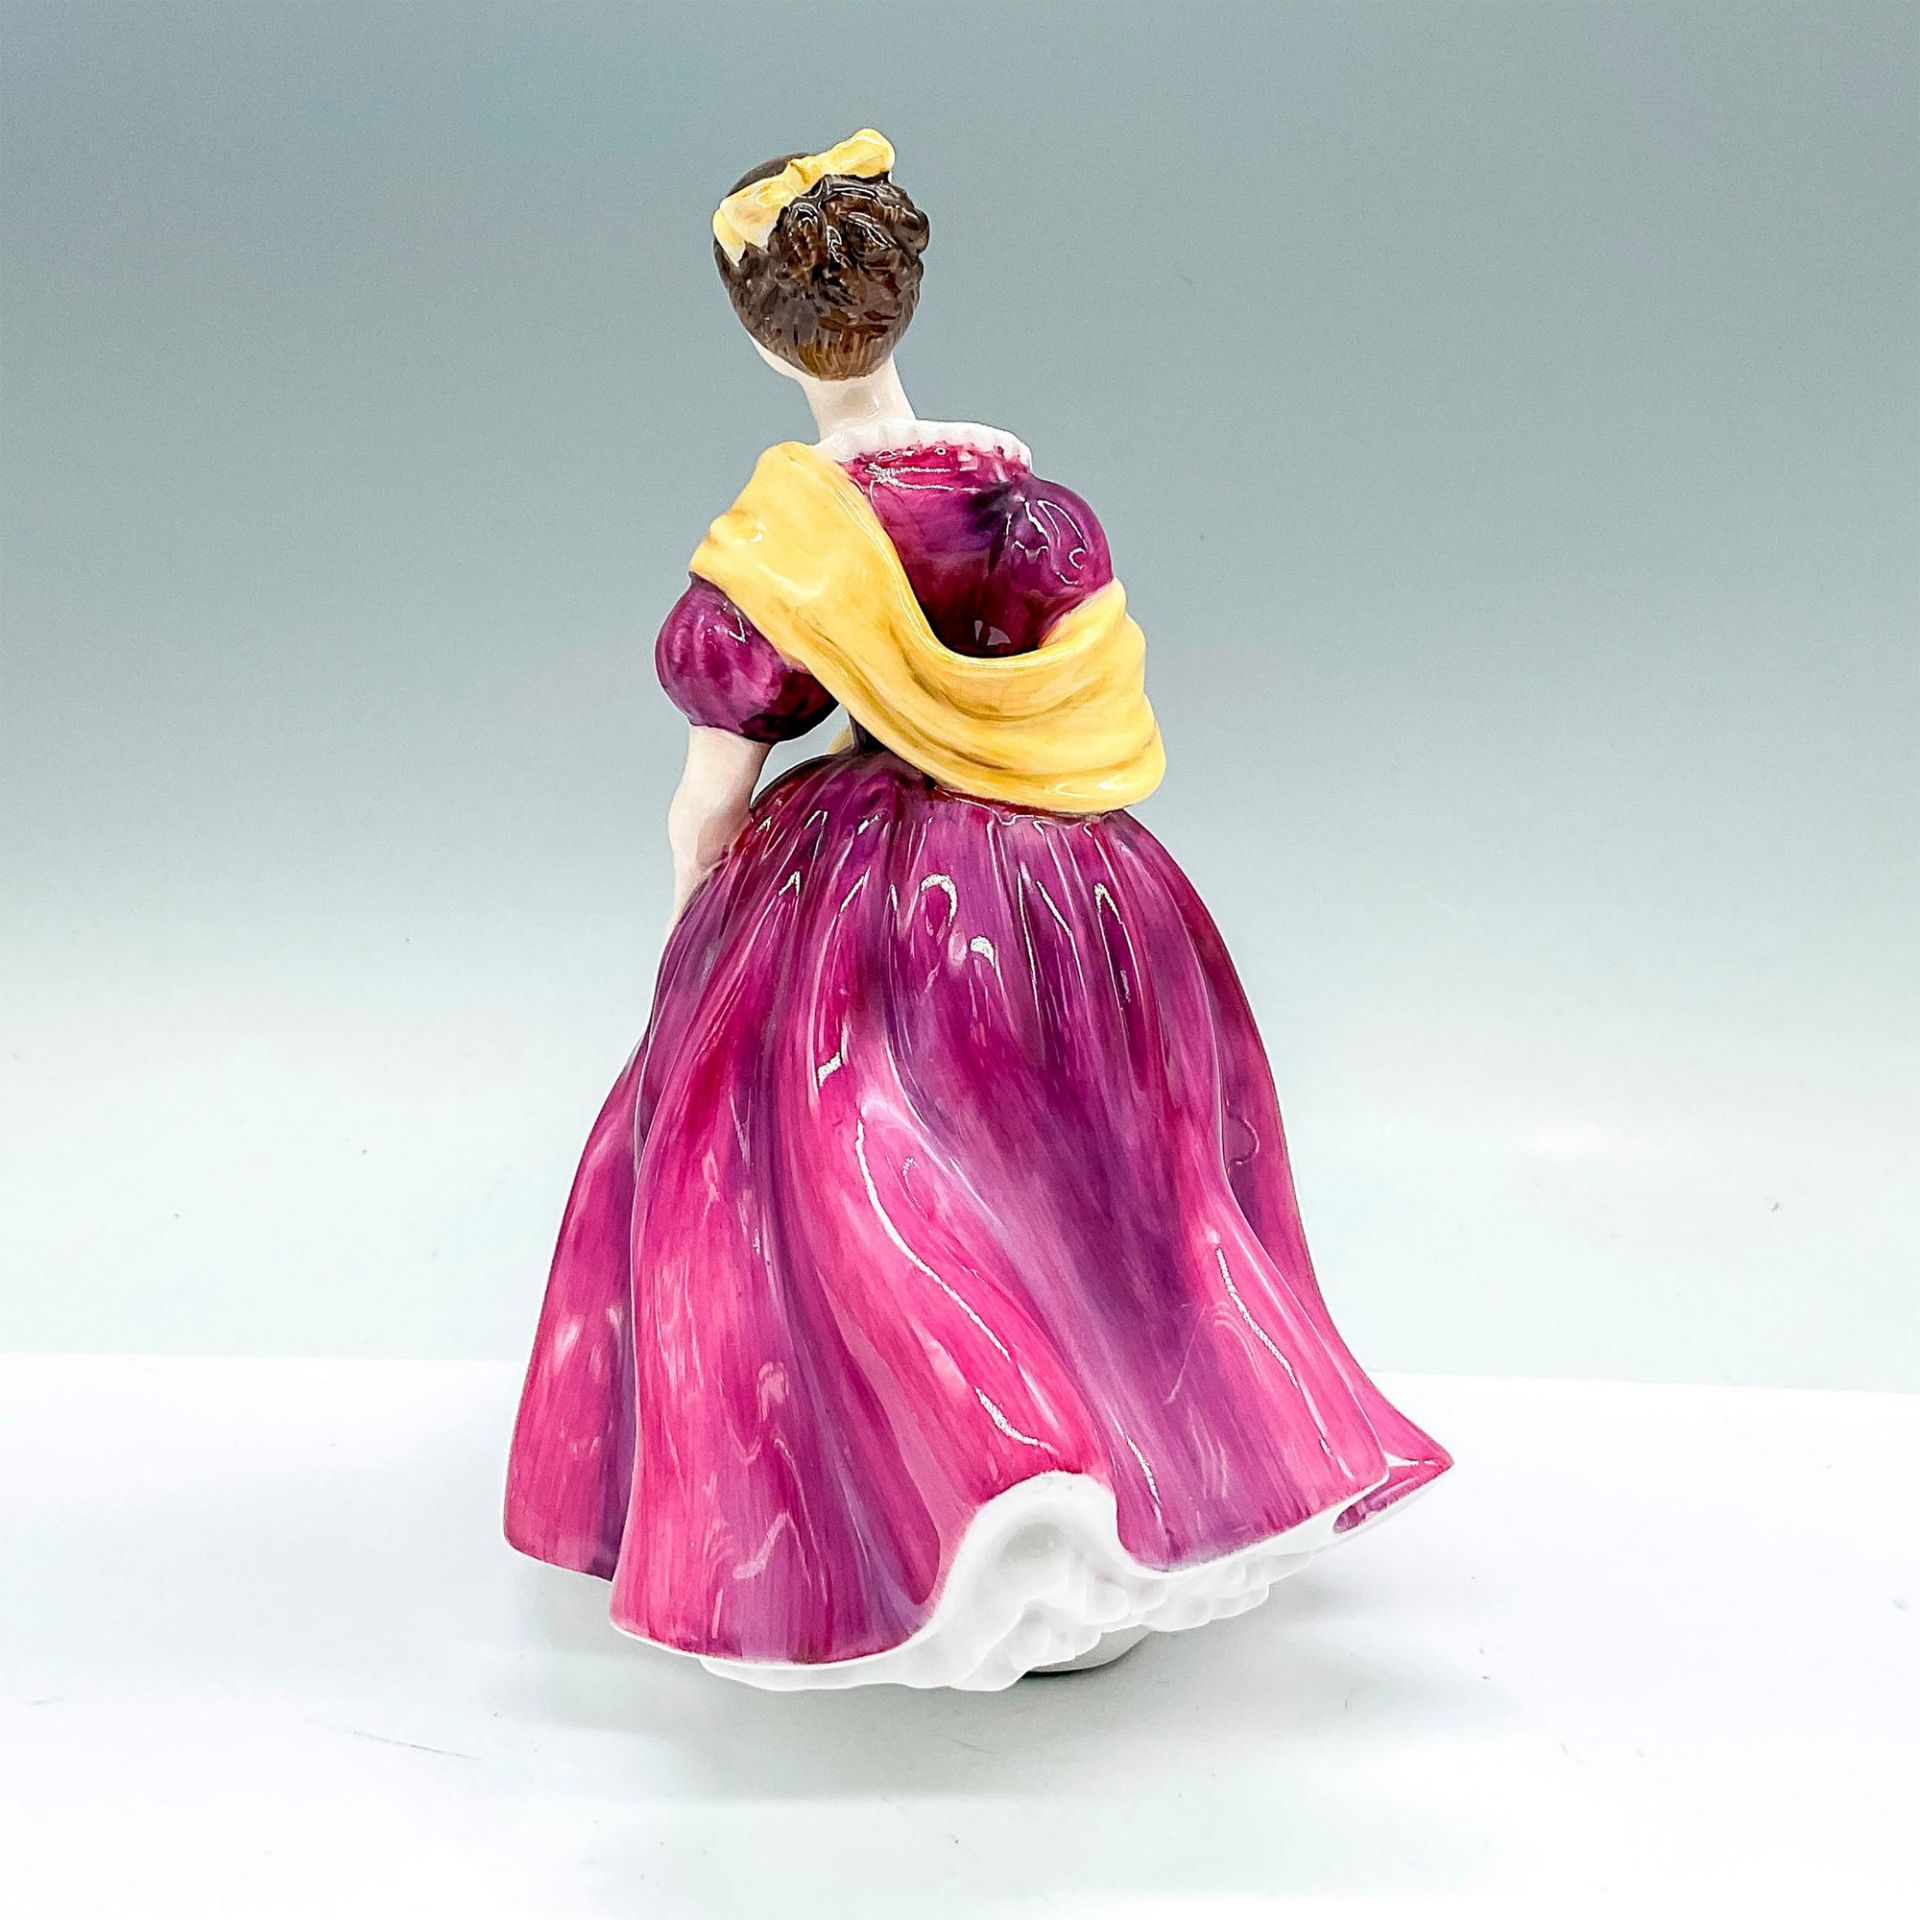 Adrienne - HN2152 - Royal Doulton Figurine - Image 2 of 3